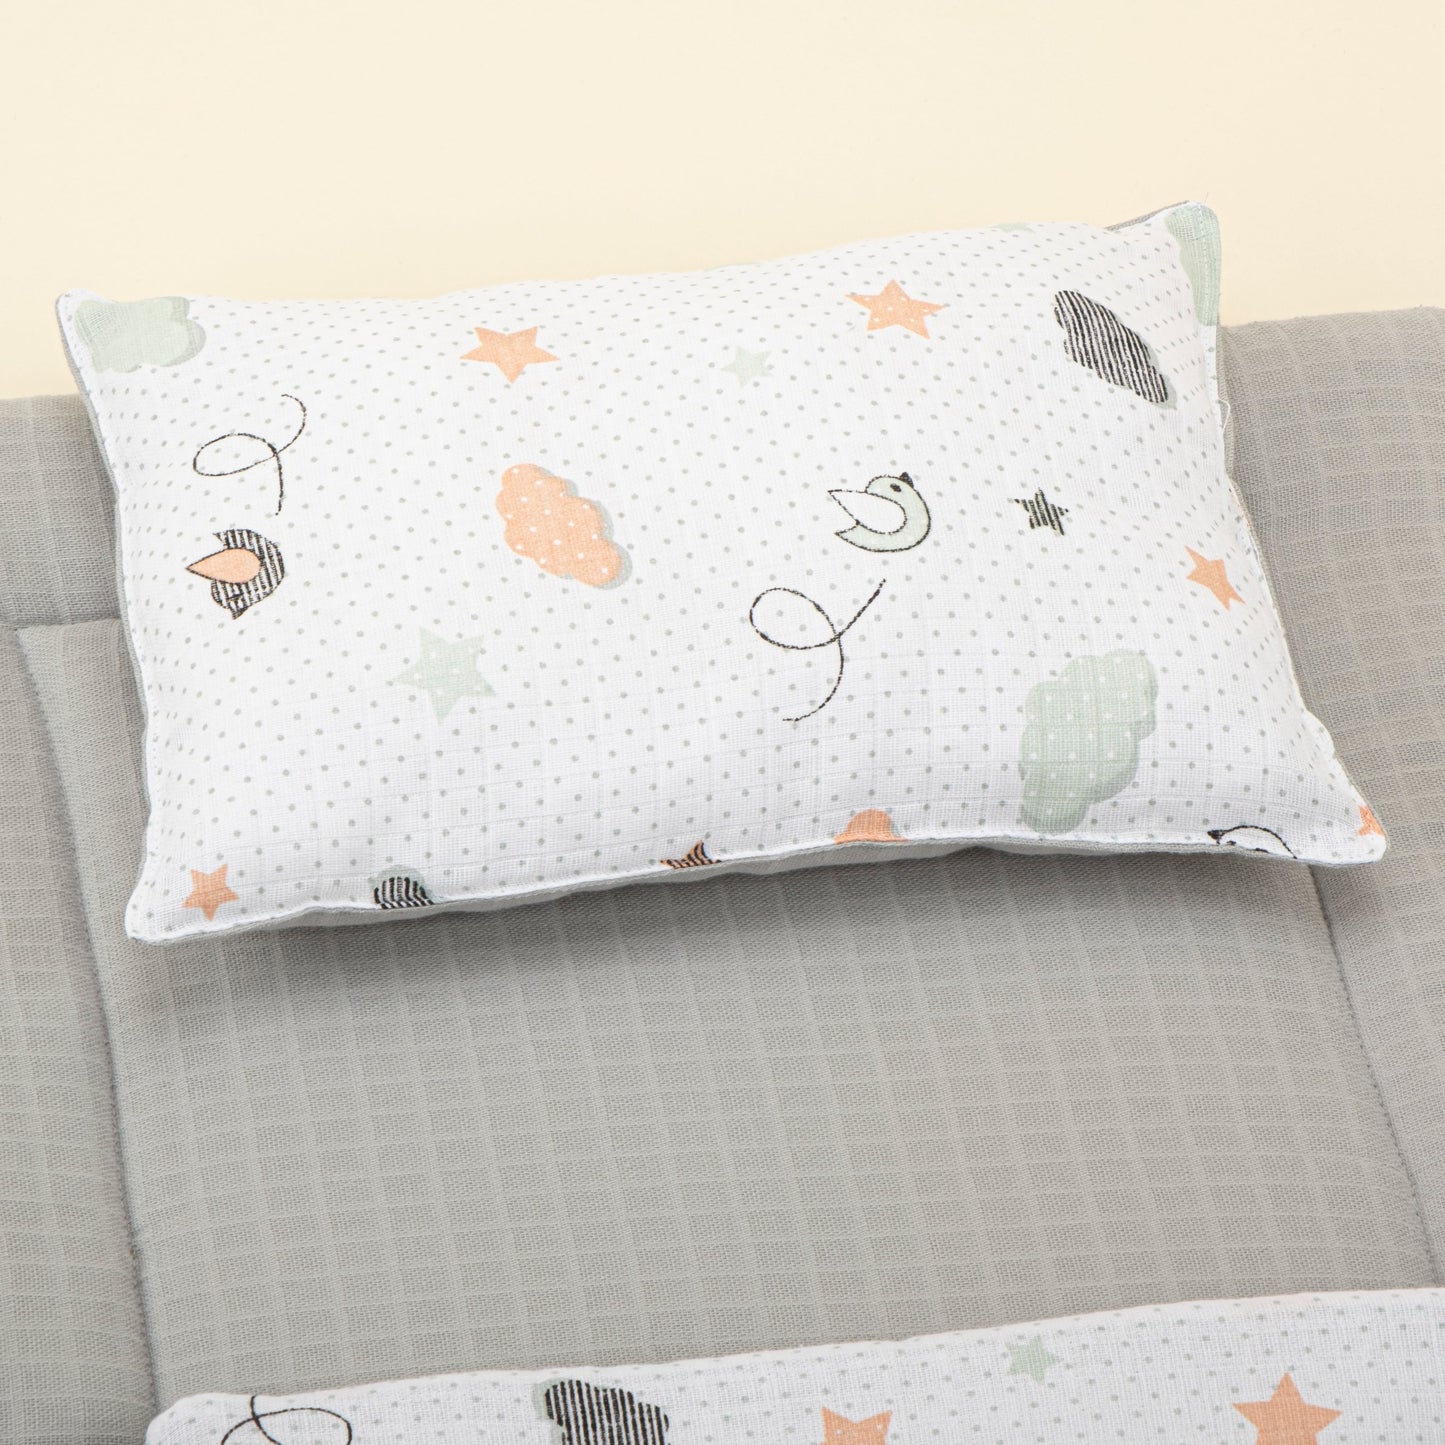 Double Side Changing Pad - Gray Muslin - Birds